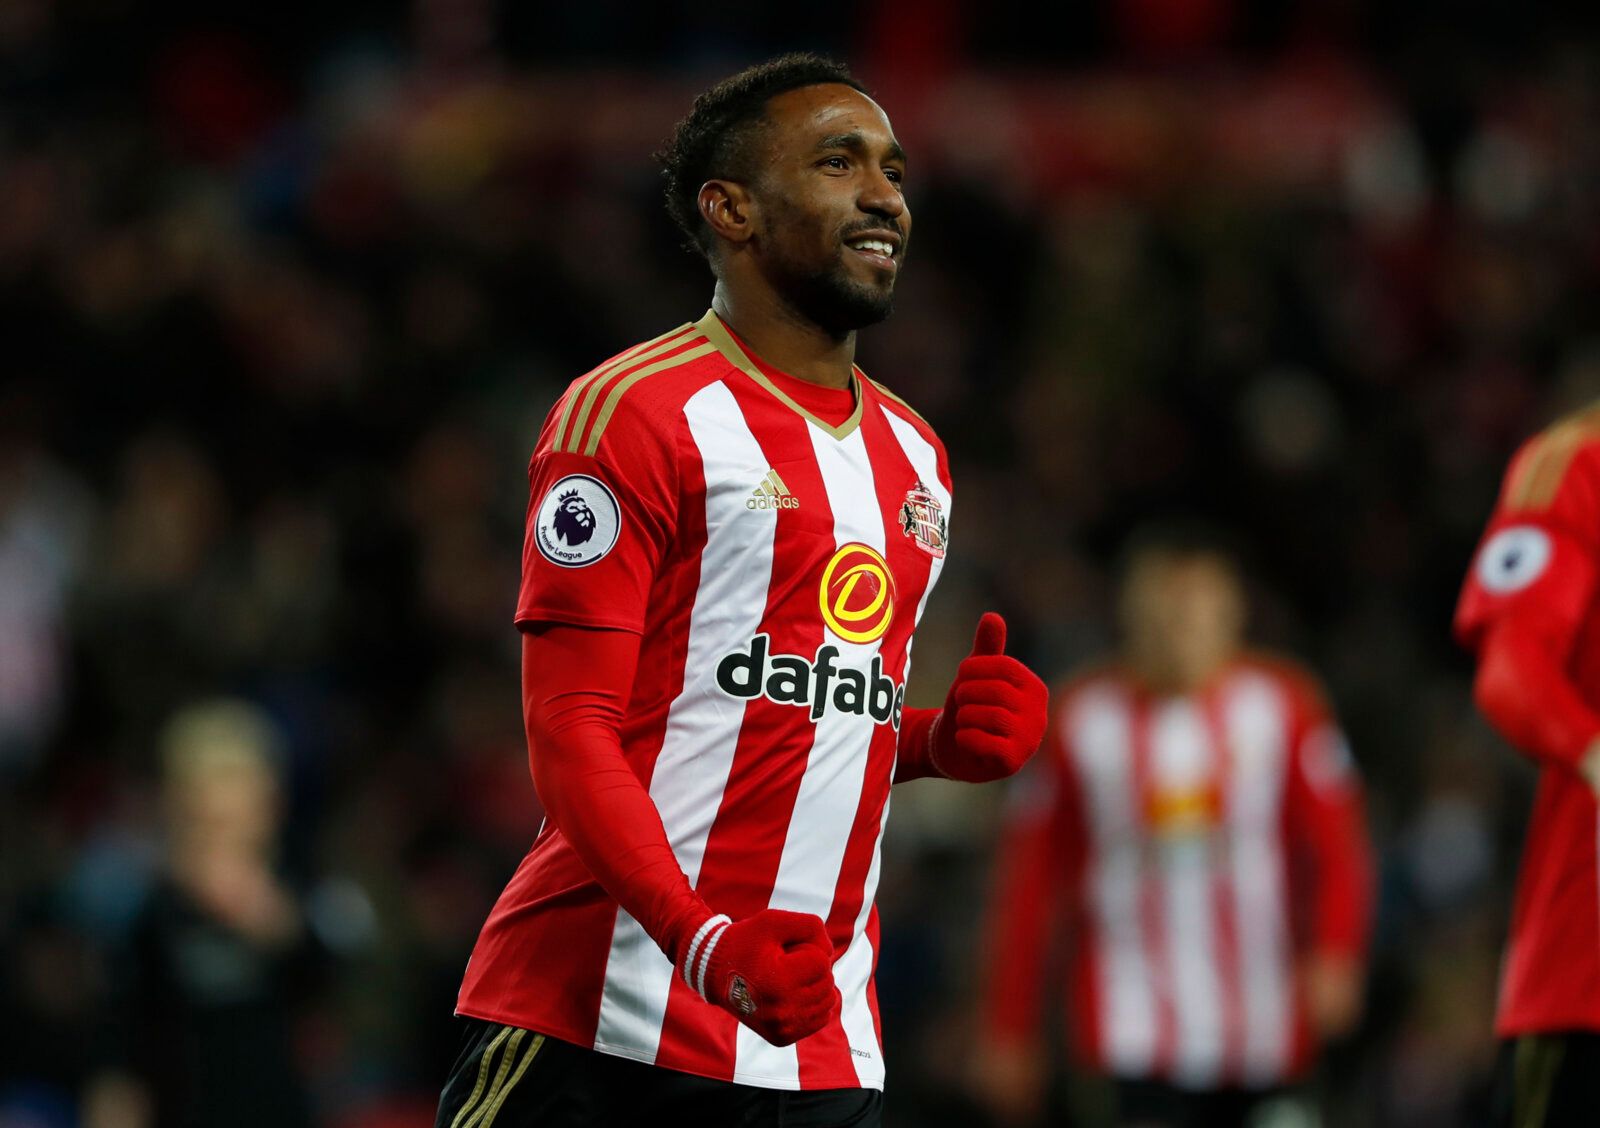 Britain Football Soccer - Sunderland v Liverpool - Premier League - Stadium of Light - 2/1/17 Sunderland's Jermain Defoe celebrates scoring their second goal  Reuters / Russell Cheyne Livepic EDITORIAL USE ONLY. No use with unauthorized audio, video, data, fixture lists, club/league logos or 